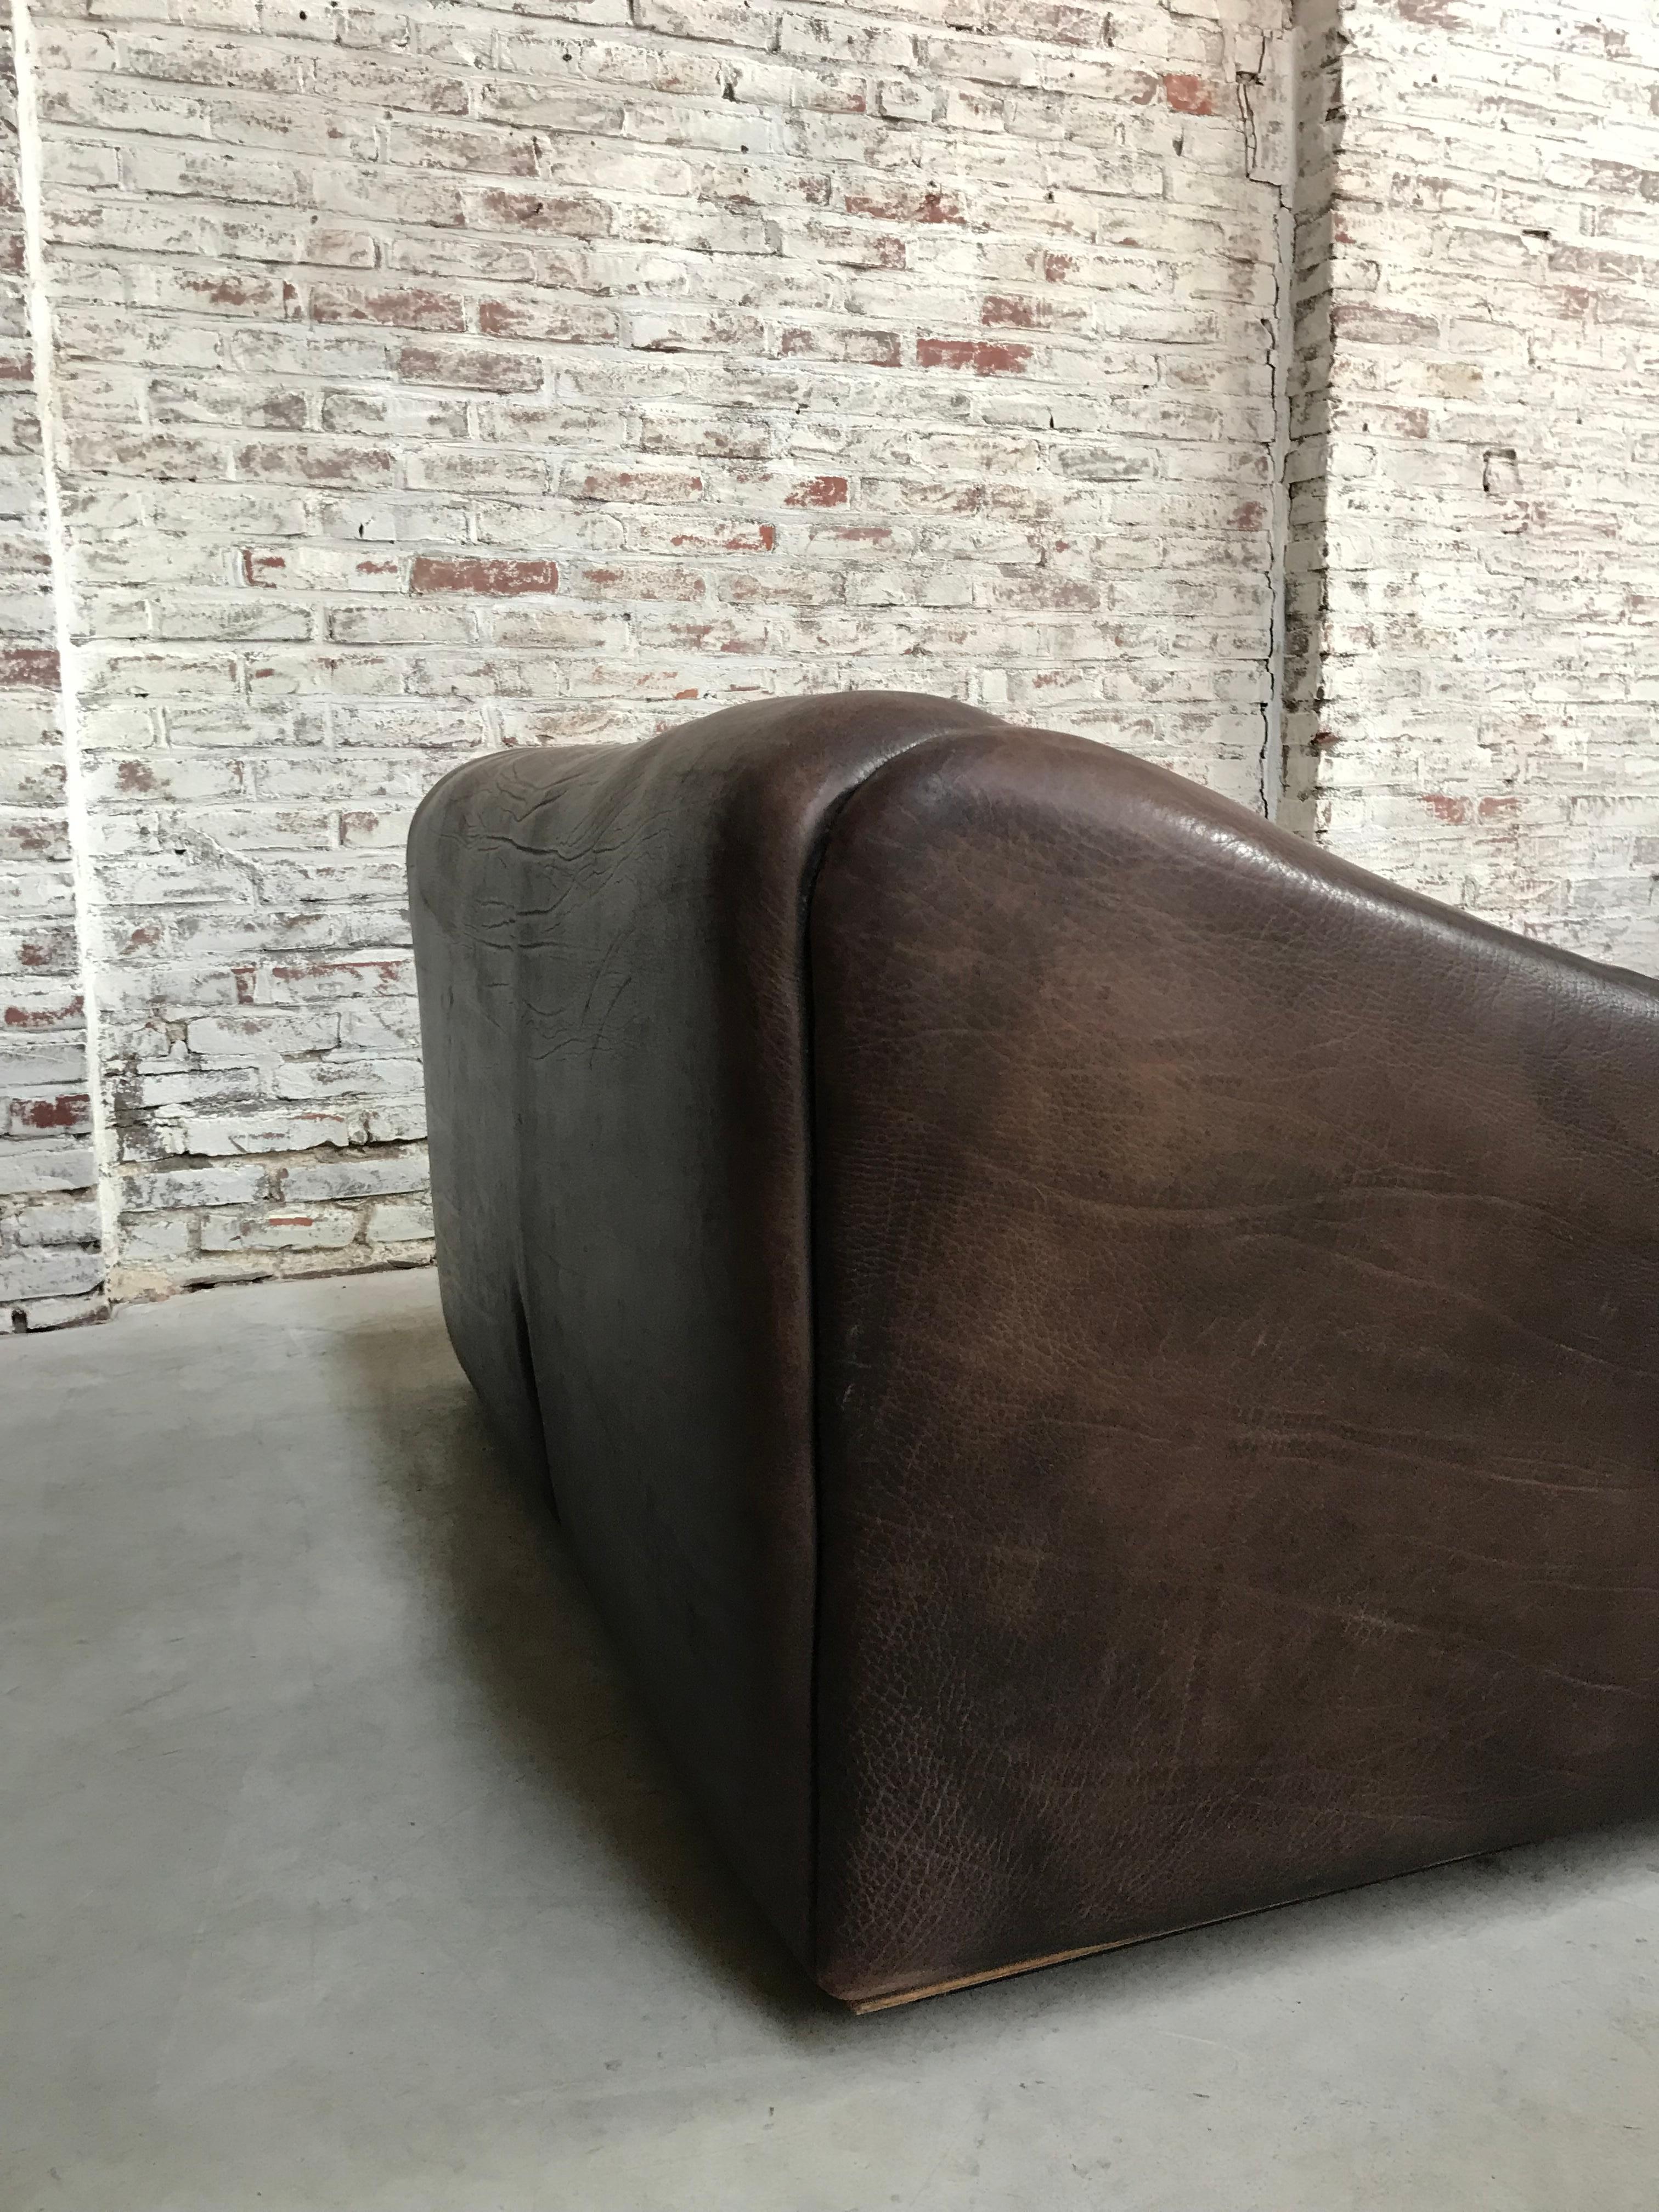 Midcentury Swiss De Sede Ds-47 Two-Seat in Chocolat Neck Leather, 1970s For Sale 2